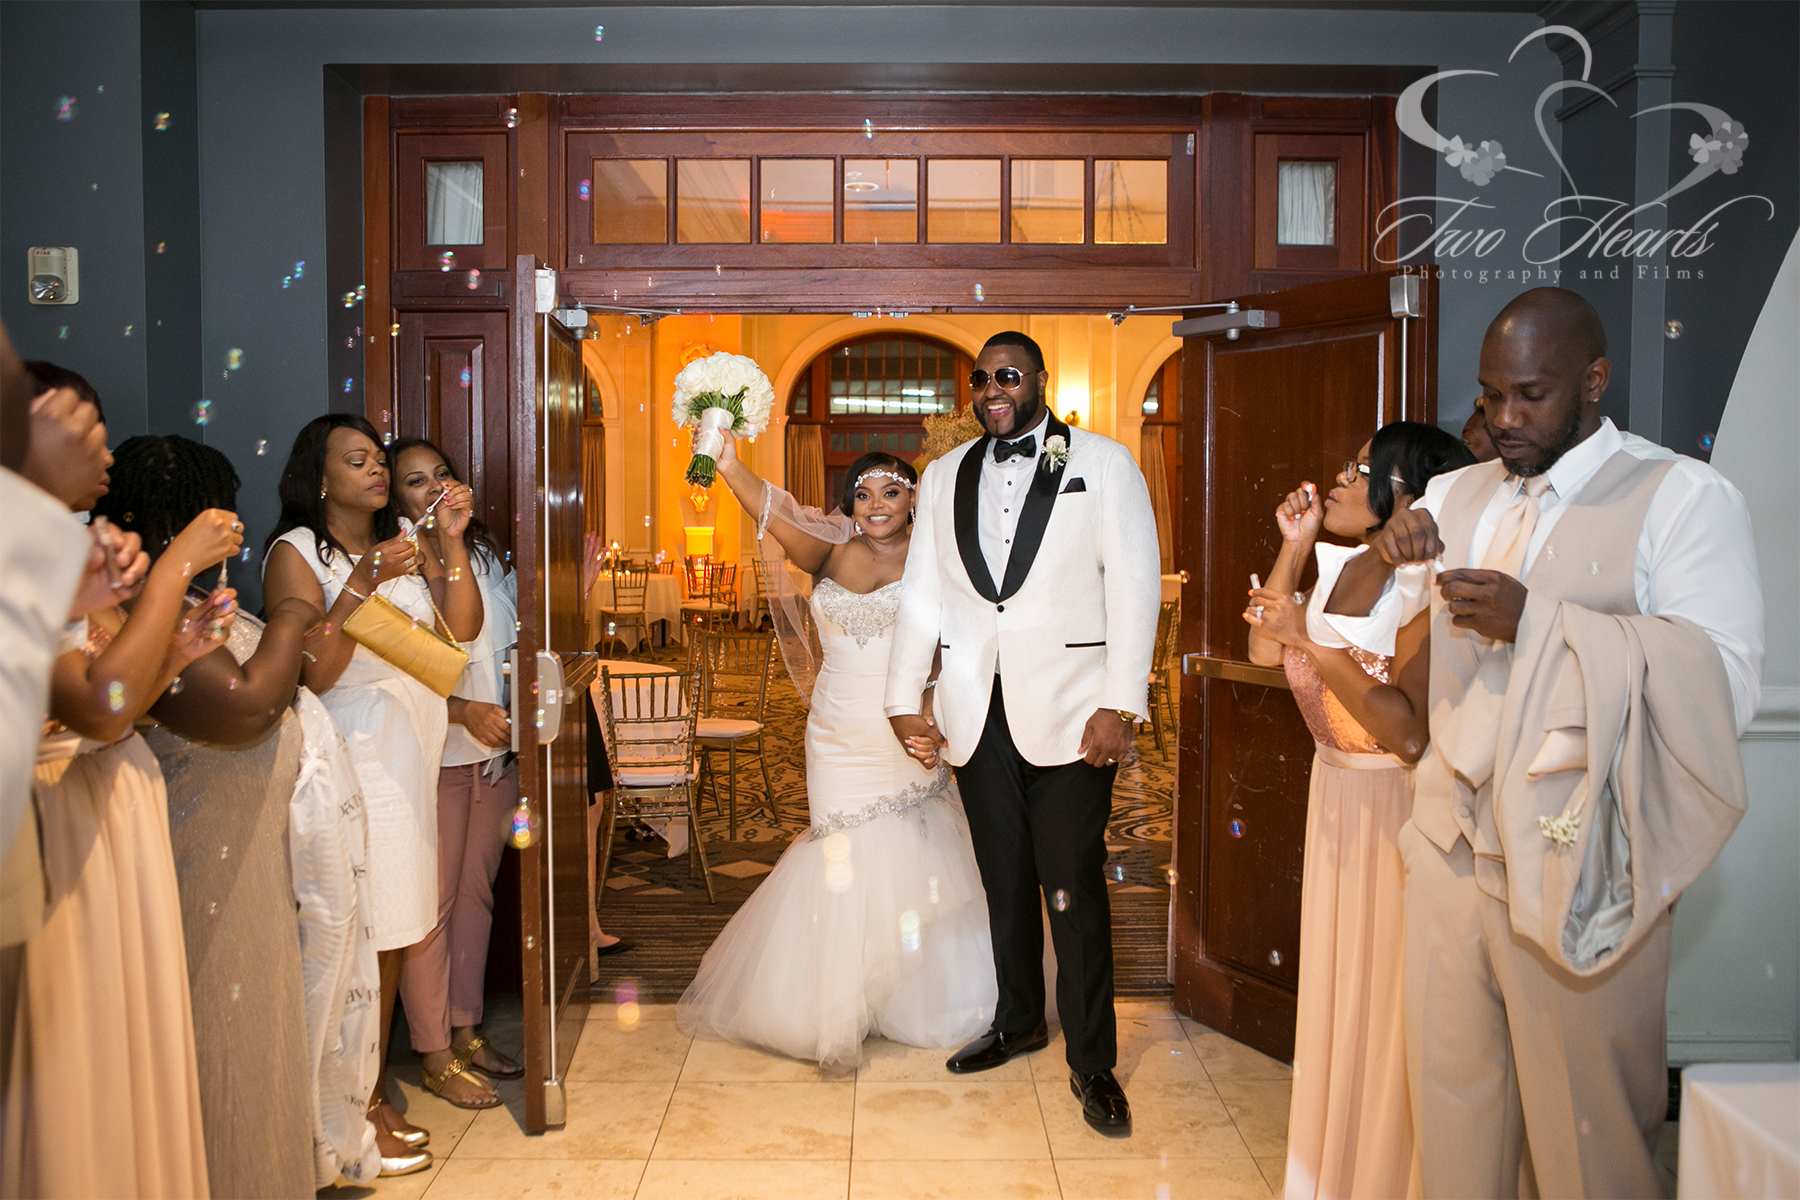 Let Crystal Ballroom Wedding Photography Tell Your Story